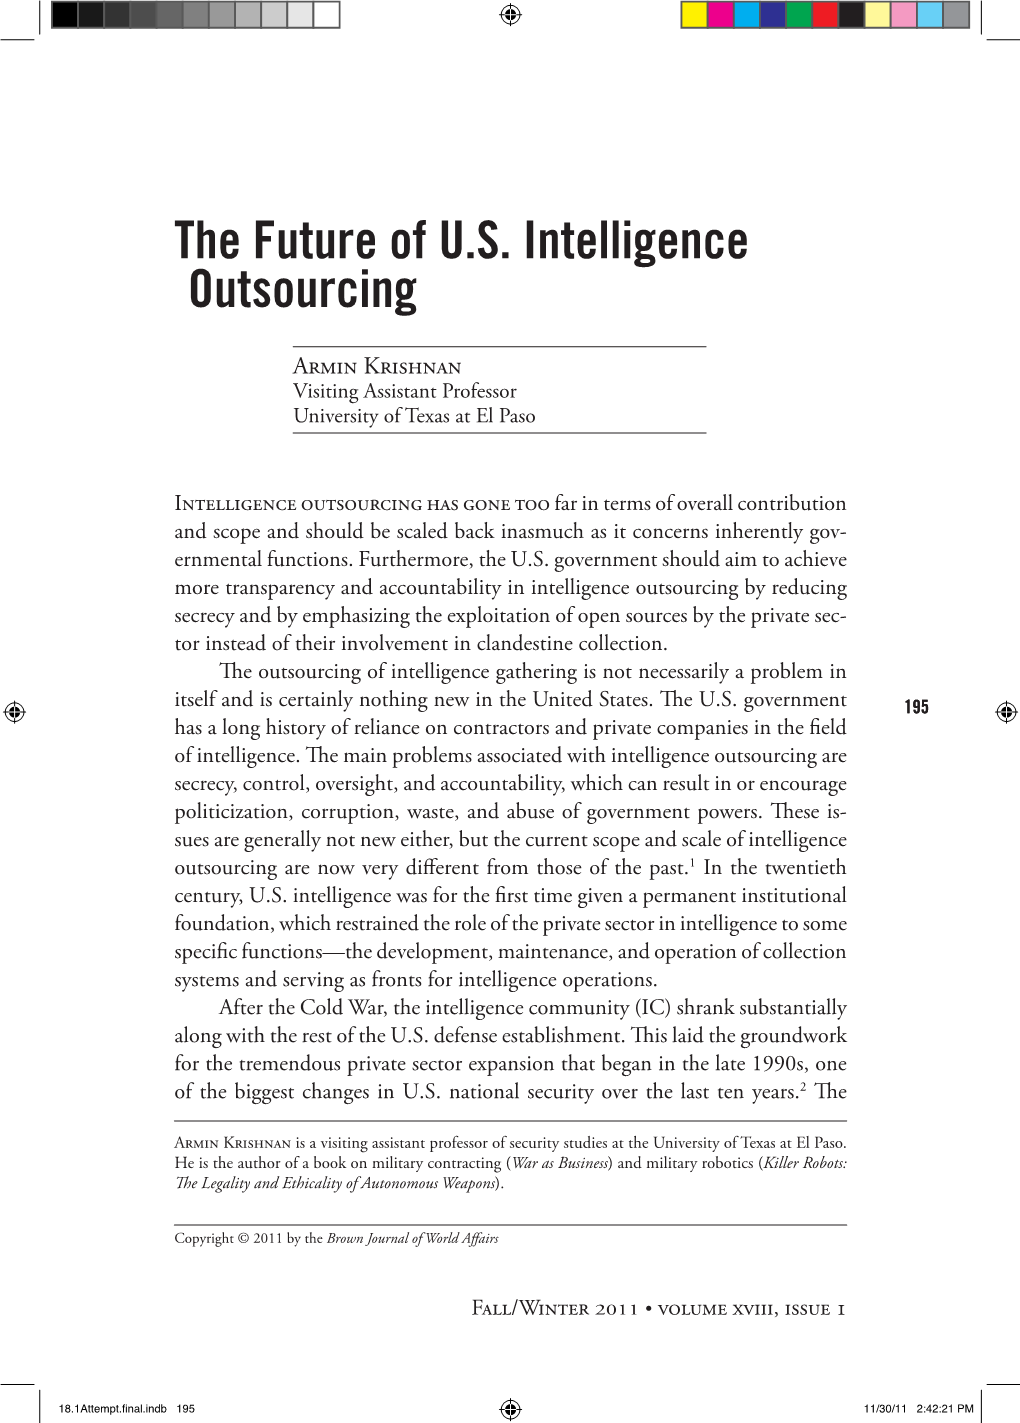 The Future of U.S. Intelligence Outsourcing